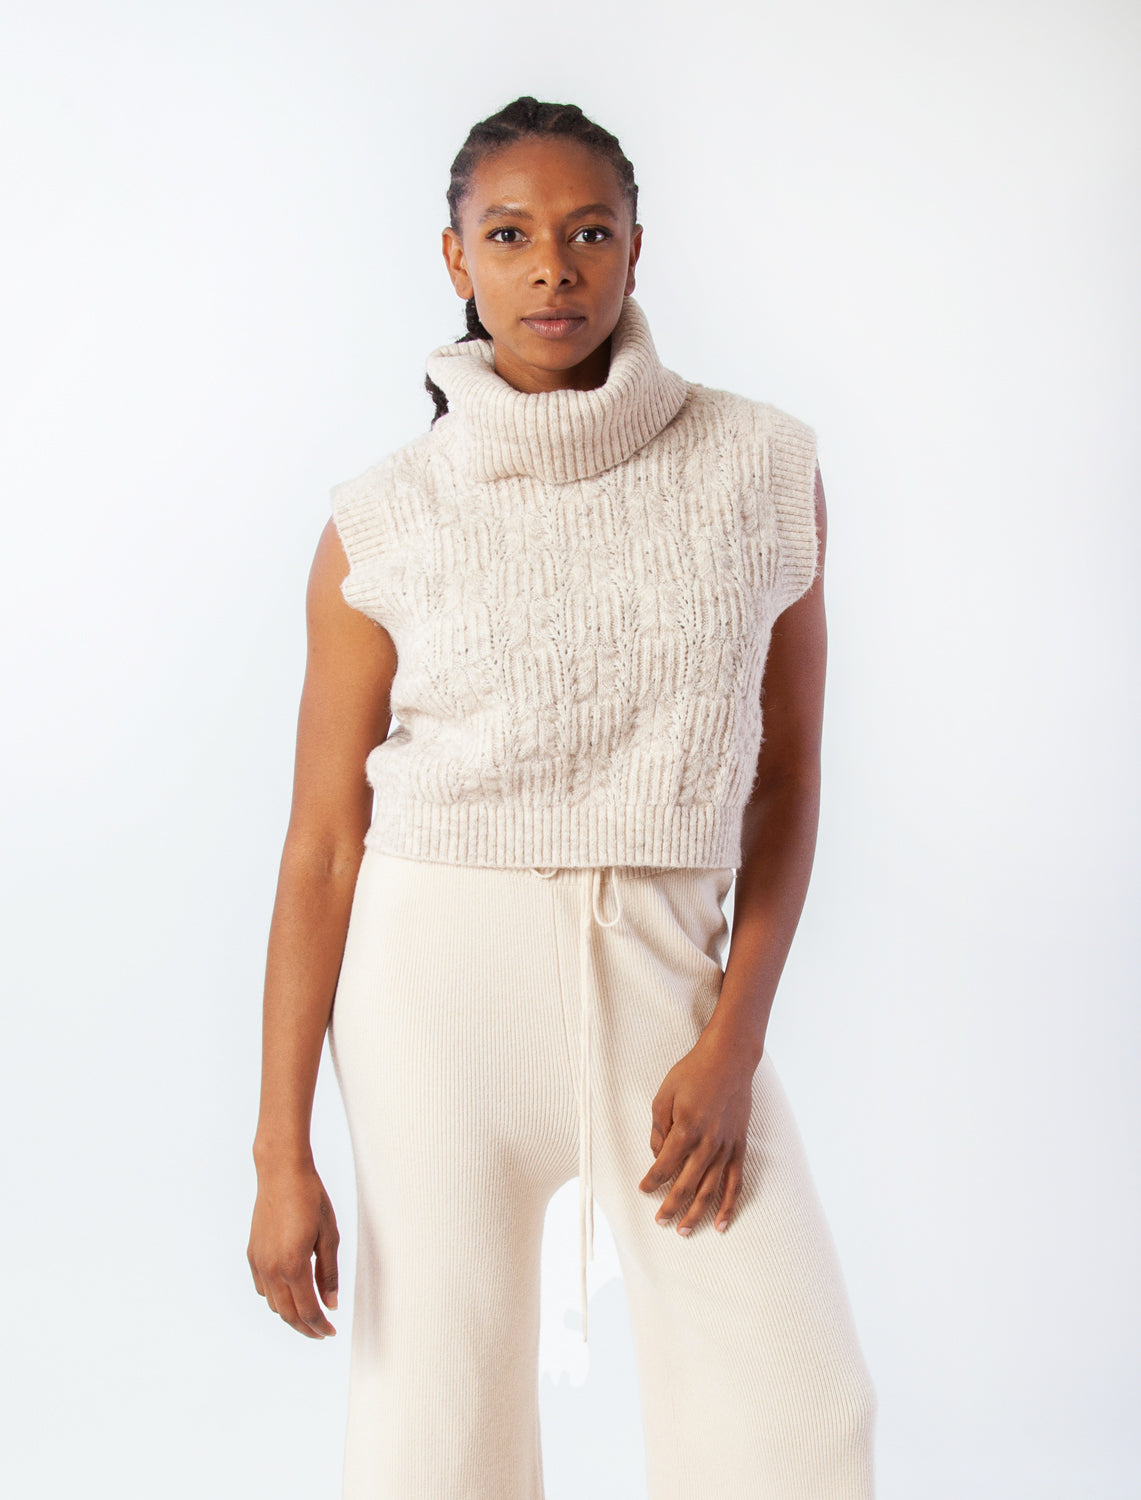 Women's Knit Tops  Cardigans, Ribbed Sleeves, Vests & More